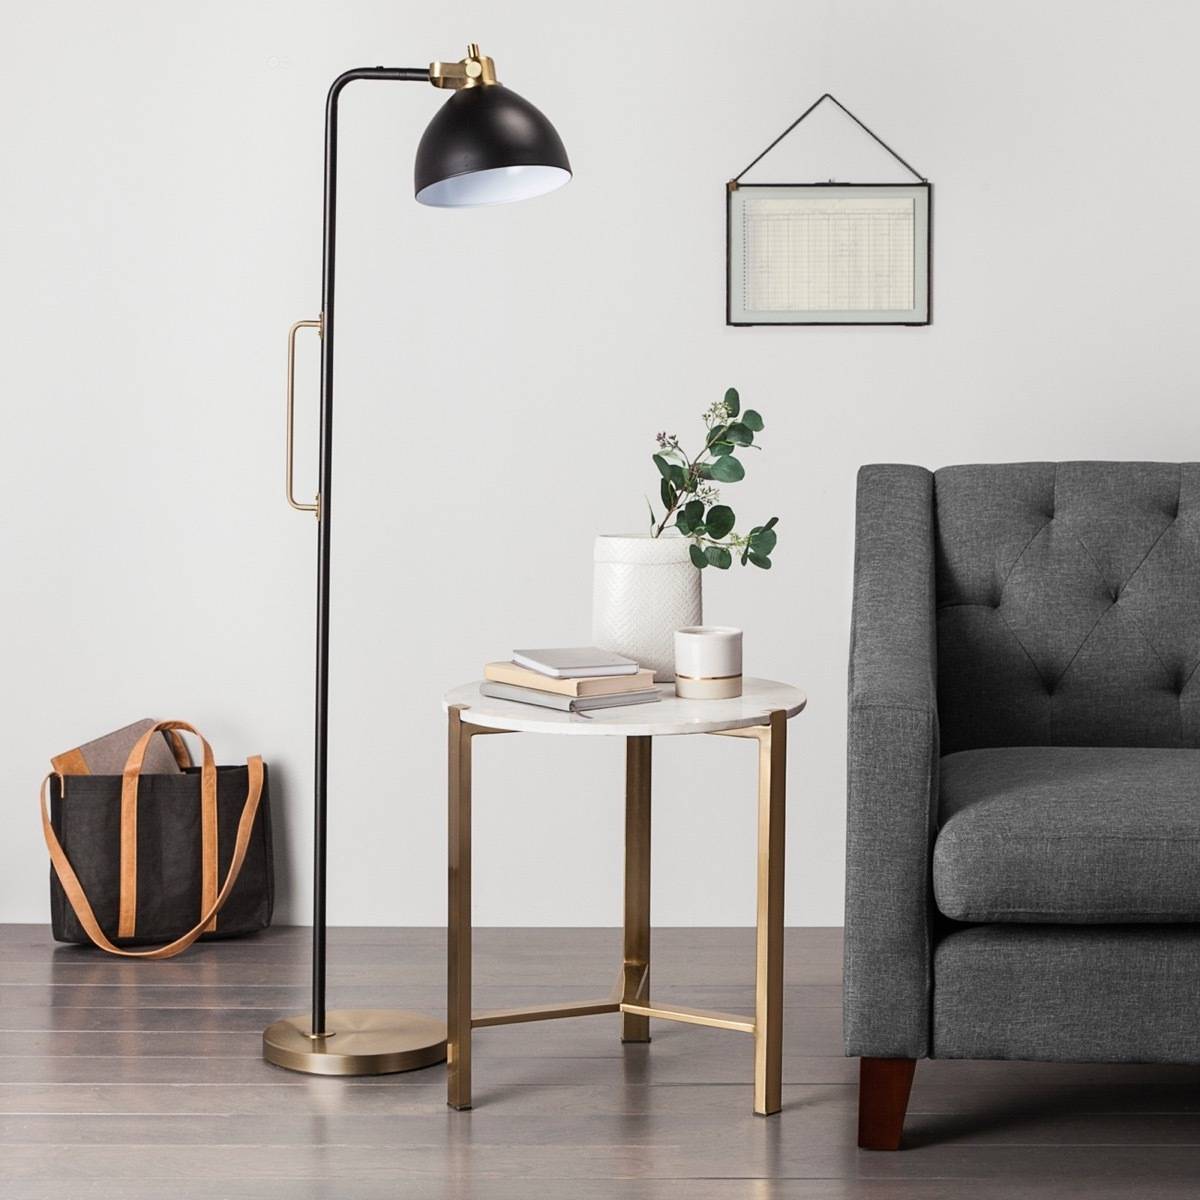 Black and brass floor lamp from Target